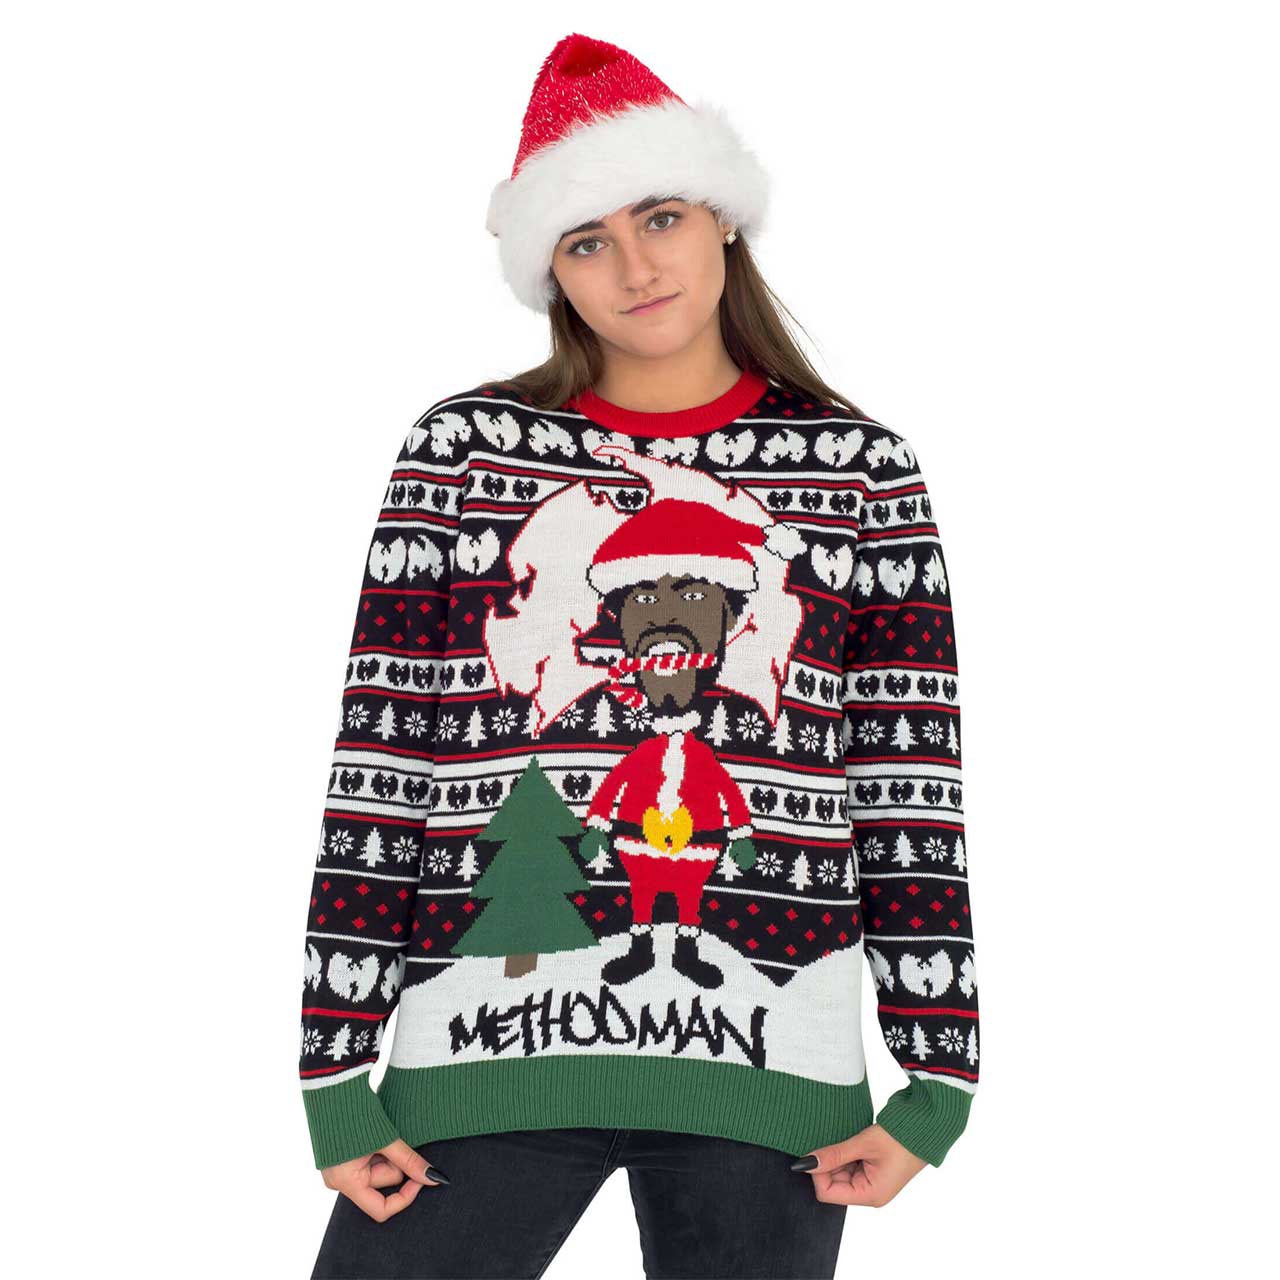 Women’s Method Man Ugly Christmas Sweater,New Products : uglyschristmassweater.com